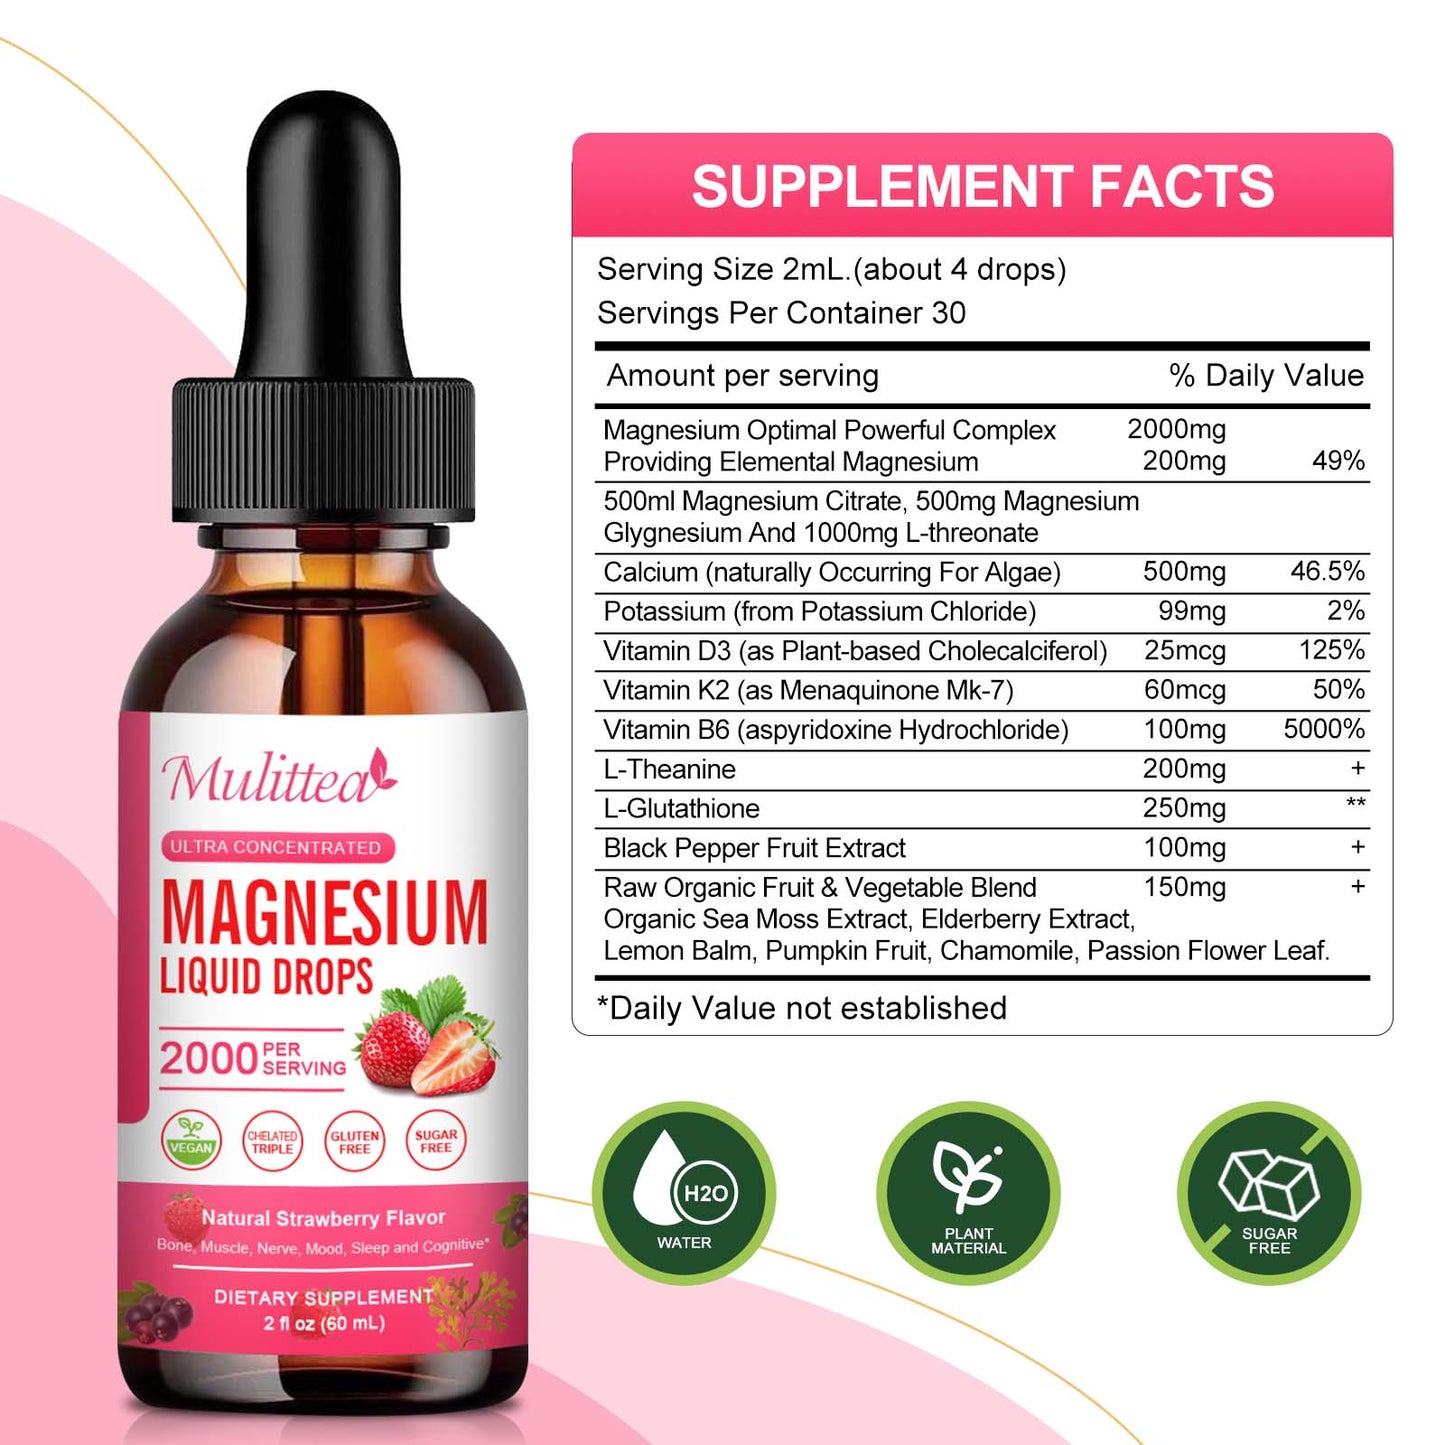 (2 Pack) Magnesium Supplement, 1000mg with High Potency Magnesium 500 Glycinate & 500mg Citrate, Sugar Free, Strawberry Liquid Drops Promotes Nerv,Relaxation,Muscle Sleep Support.